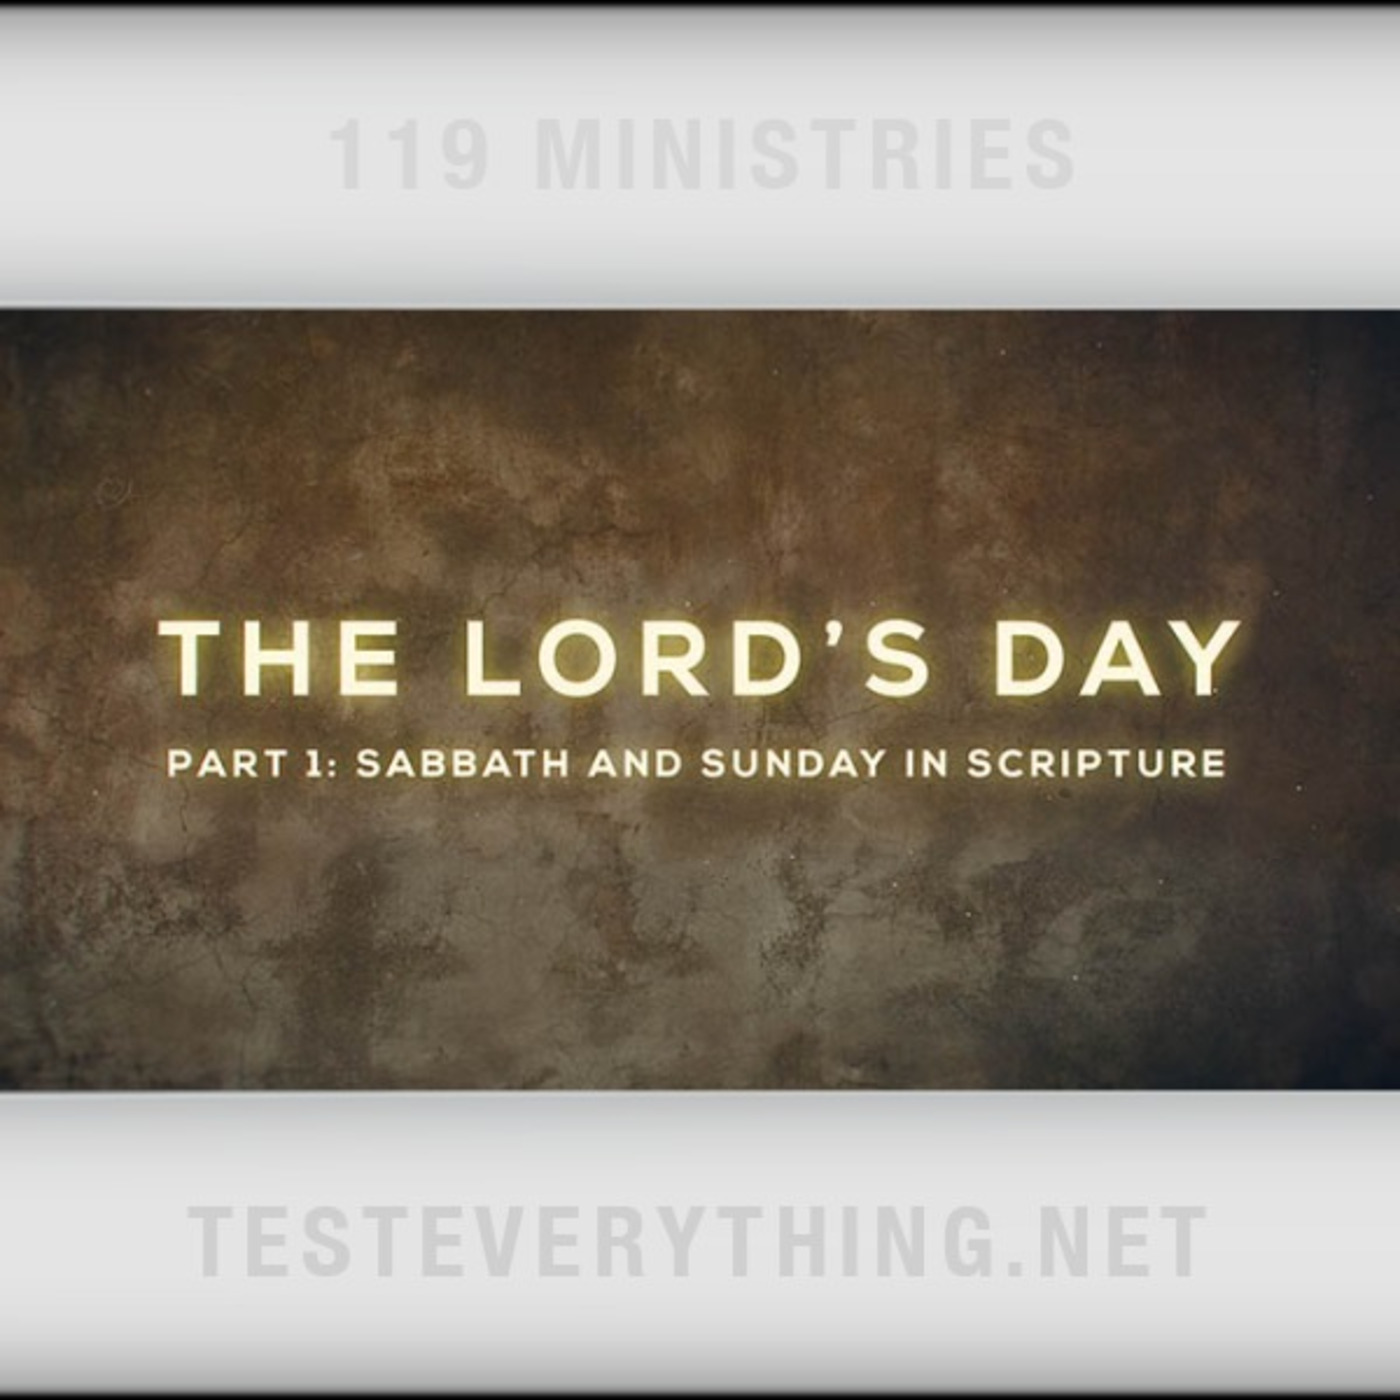 Episode 510: TE: The Lord's Day Part 1 - Sabbath and Sunday in Scripture